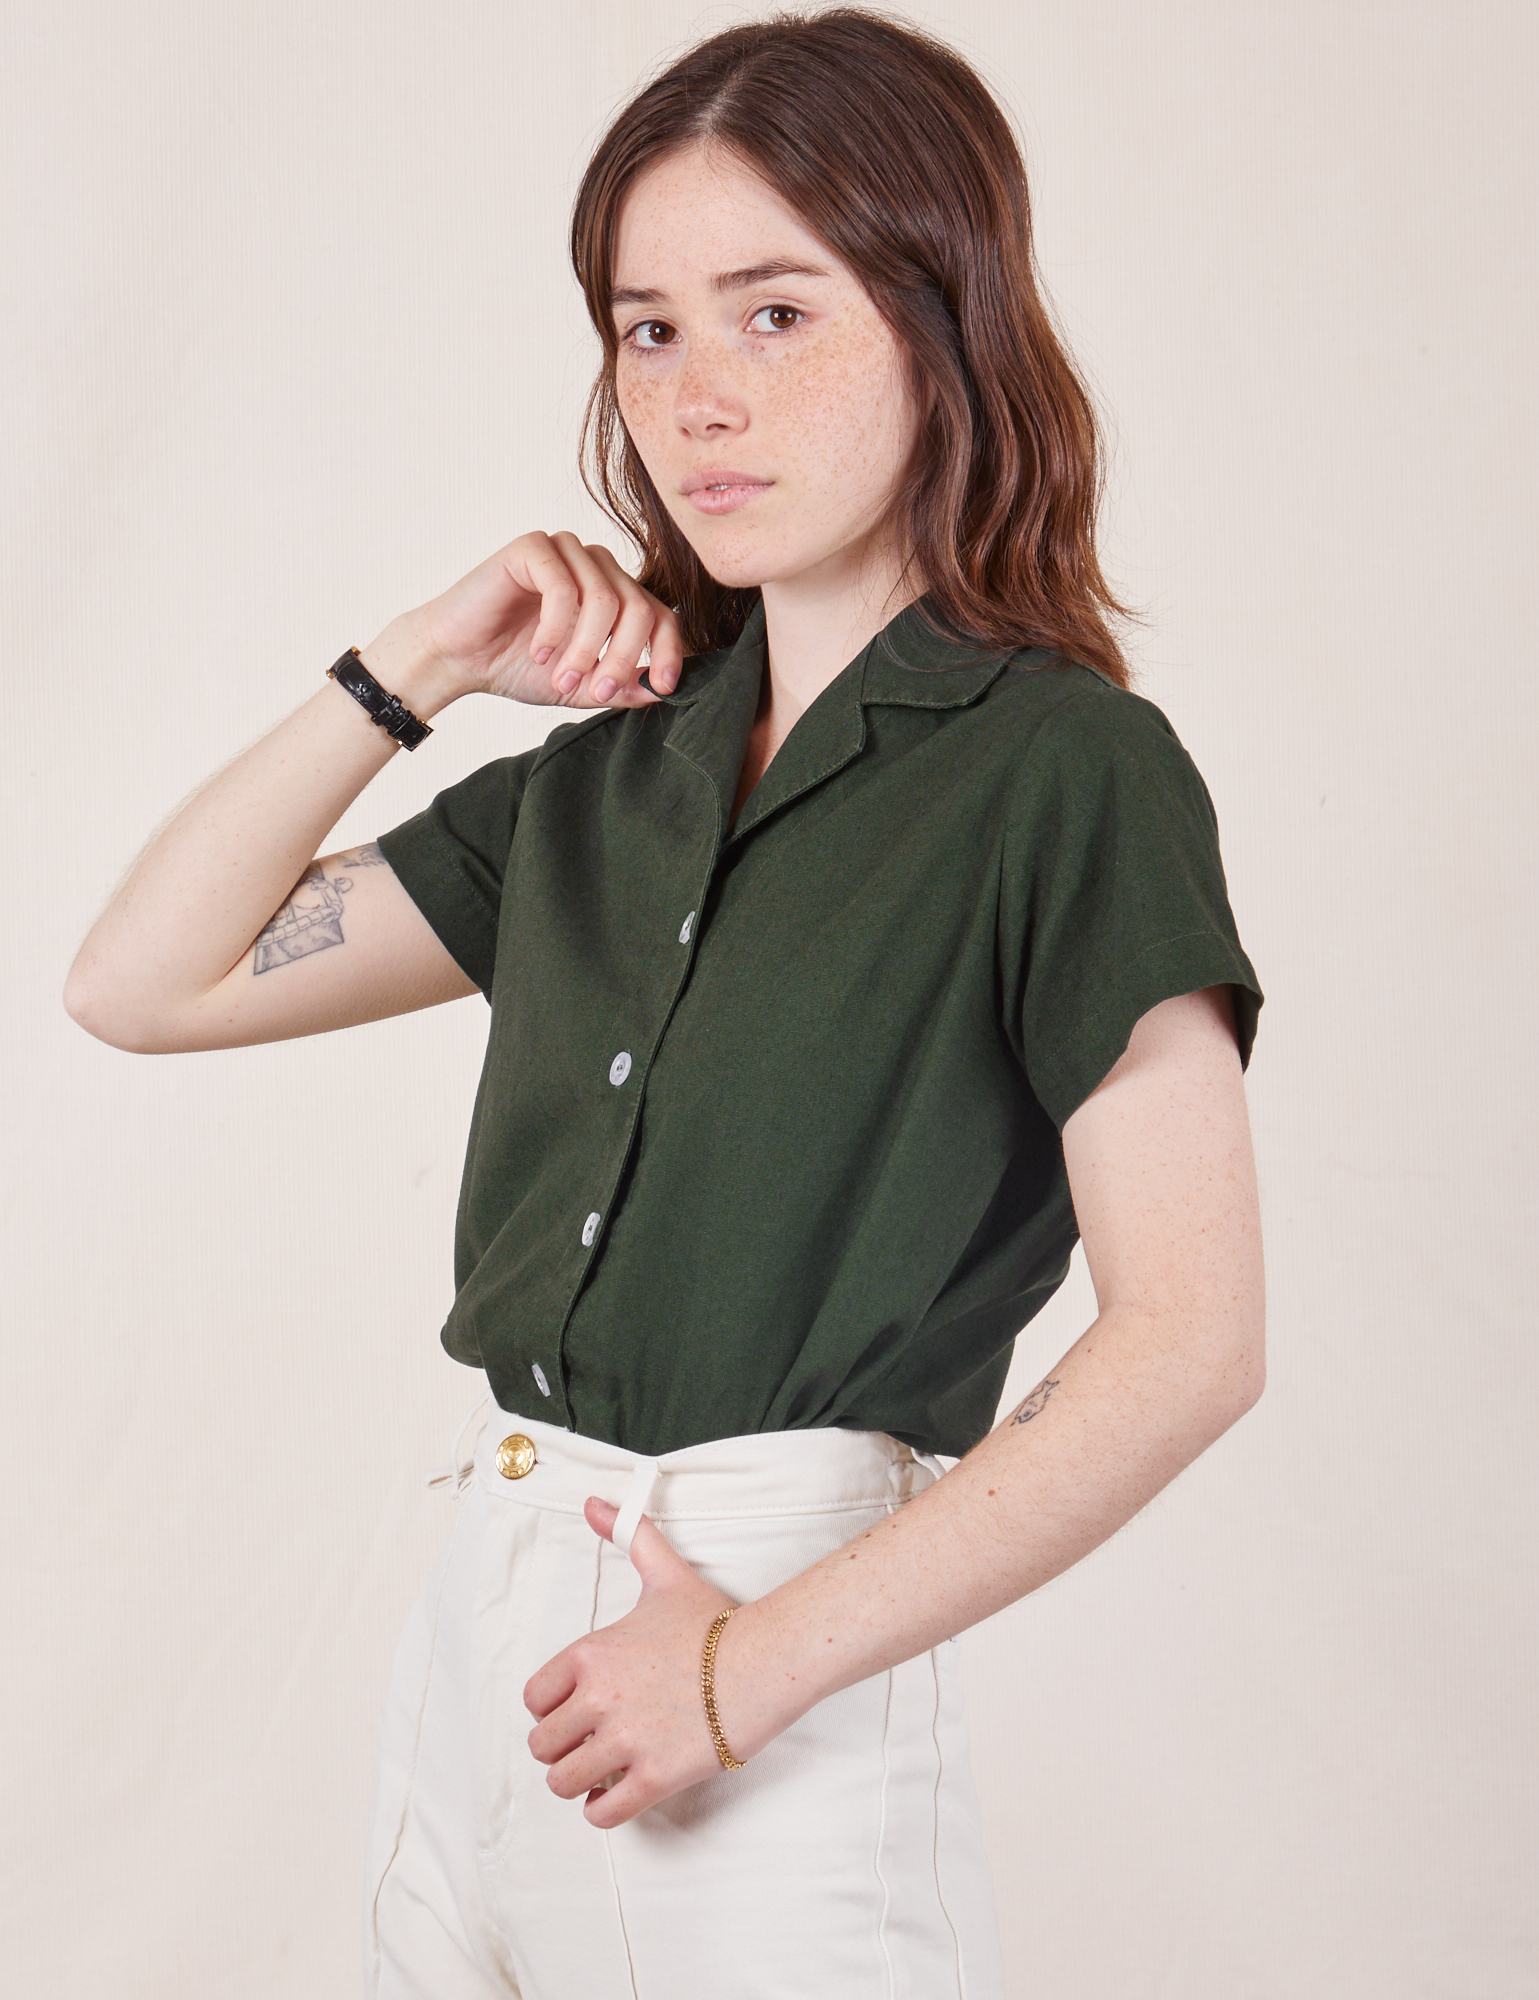 Pantry Button-Up in Swamp Green front angled view on Hana